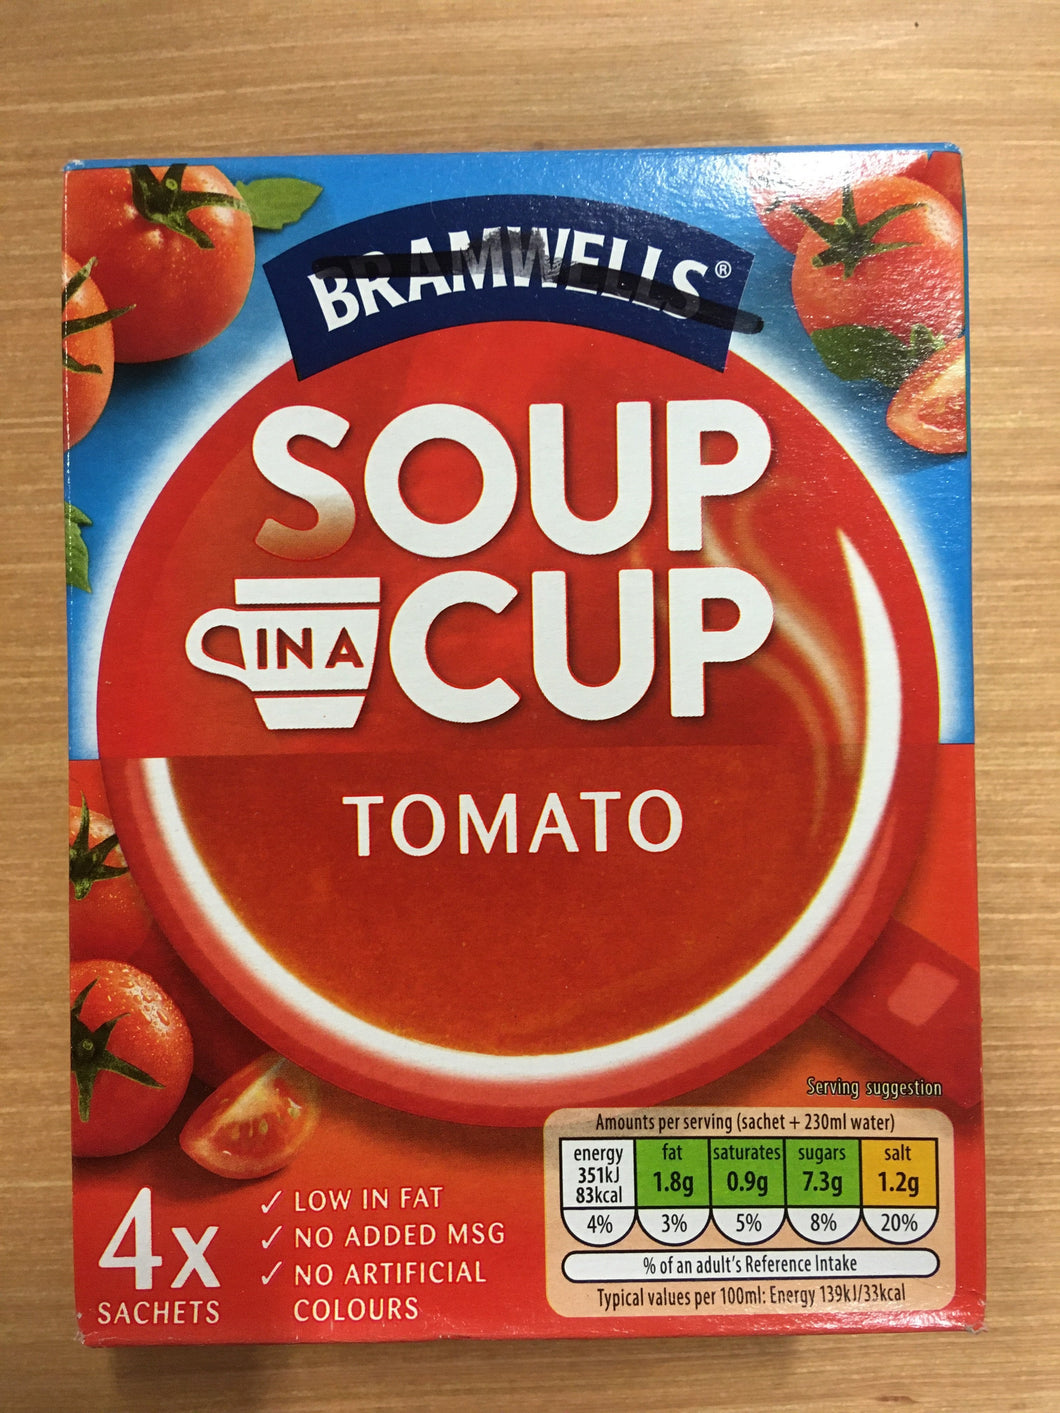 Bramwells Tomato Soup in a Cup 4x Sachets 91g